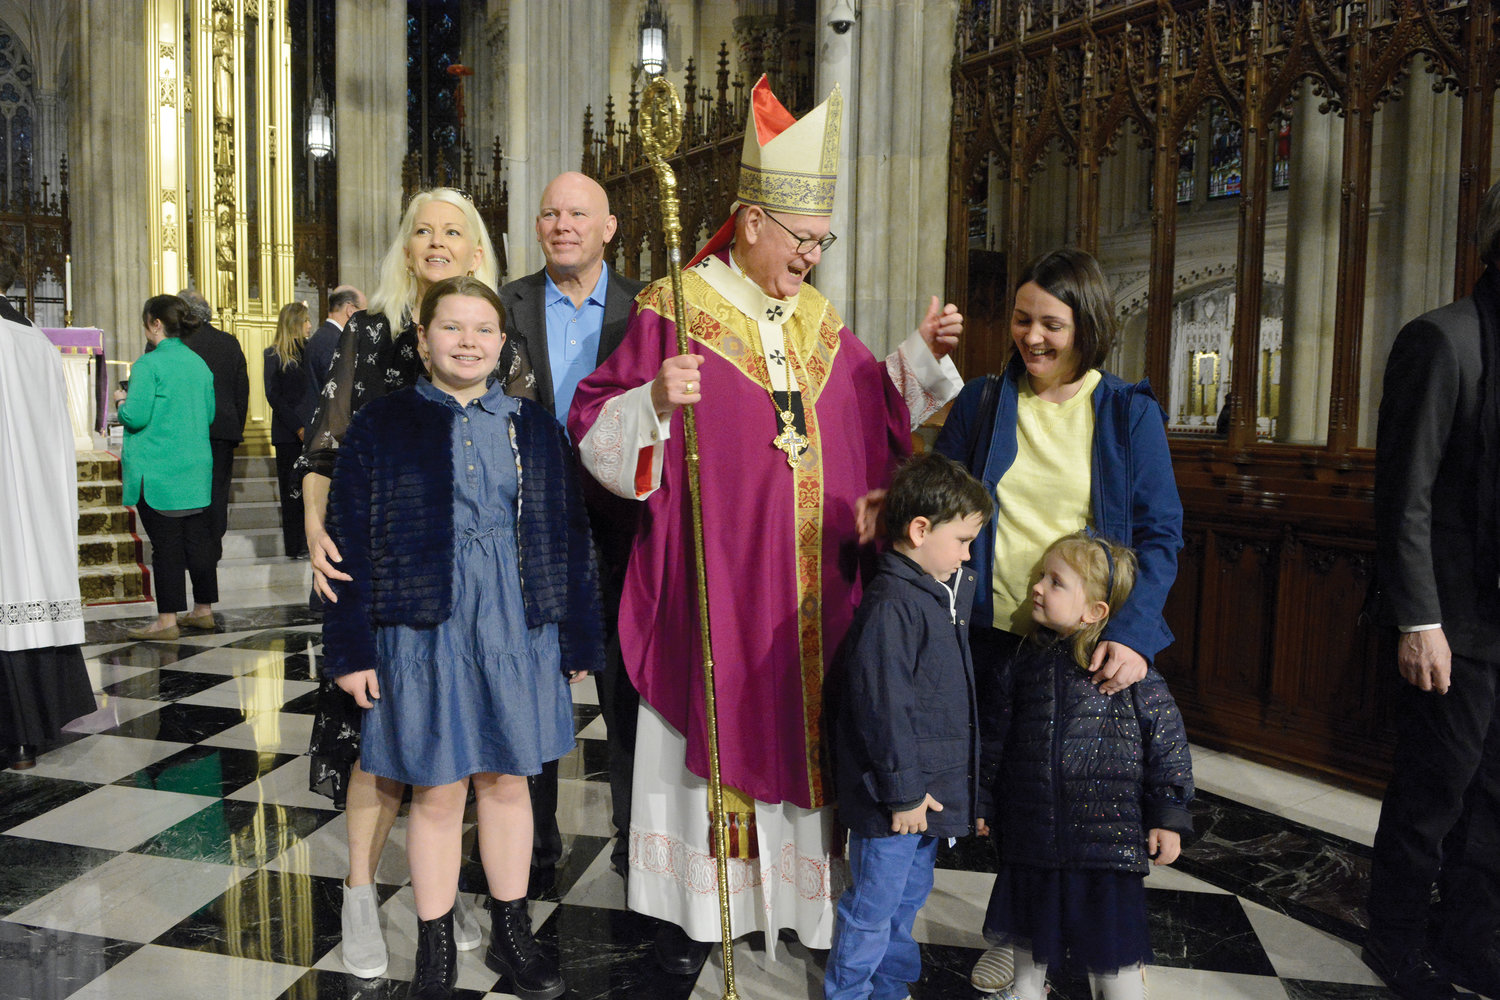 The cardinal greets a family from the Yavorif, Ukraine, which recently came to Belle Harbor, Queens, where they are being assisted by St. Francis de Sales parish. At right are Katarina Rodomon and her young children, Eugene and Elizabeth. At left are Monica and Patrick Keane and their daughter, Olivia, parishioners of St. Francis de Sales.